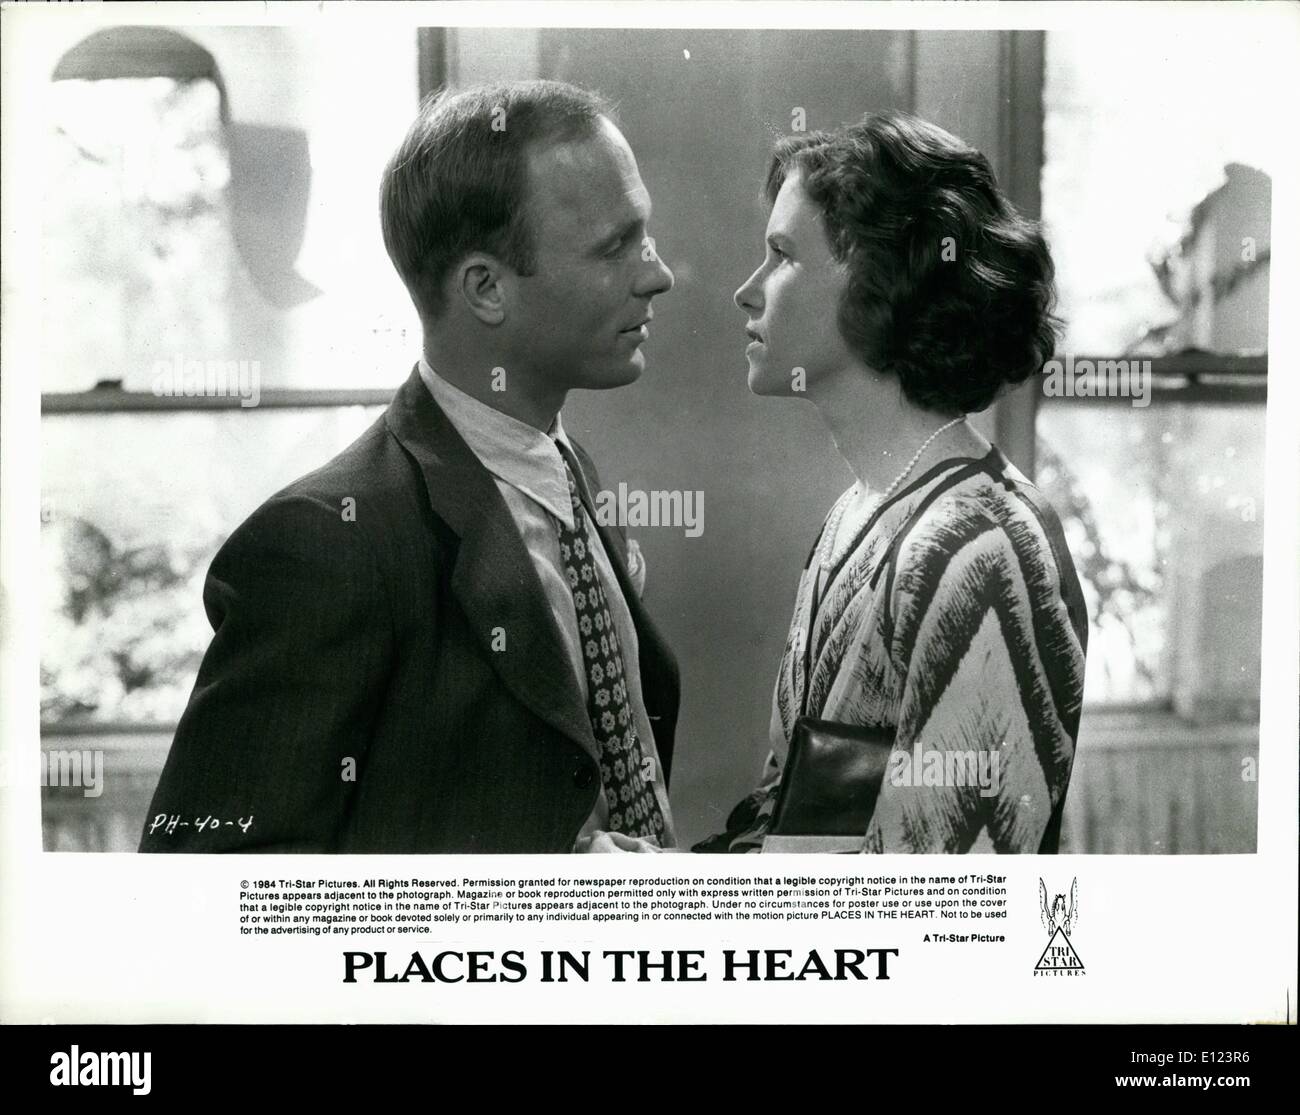 Jun. 06, 1984 - PH 40-4: Ed Harris and Amy Madigan have an extra marital affair that threatens to break up their lives with their spouses in a small Texas town during the 1930s in PLACES IN THE HEART. Written and directed by Robert Benton, PLACES IN THE HEART starring Sally Field, is a Tri-Star release. Stock Photo